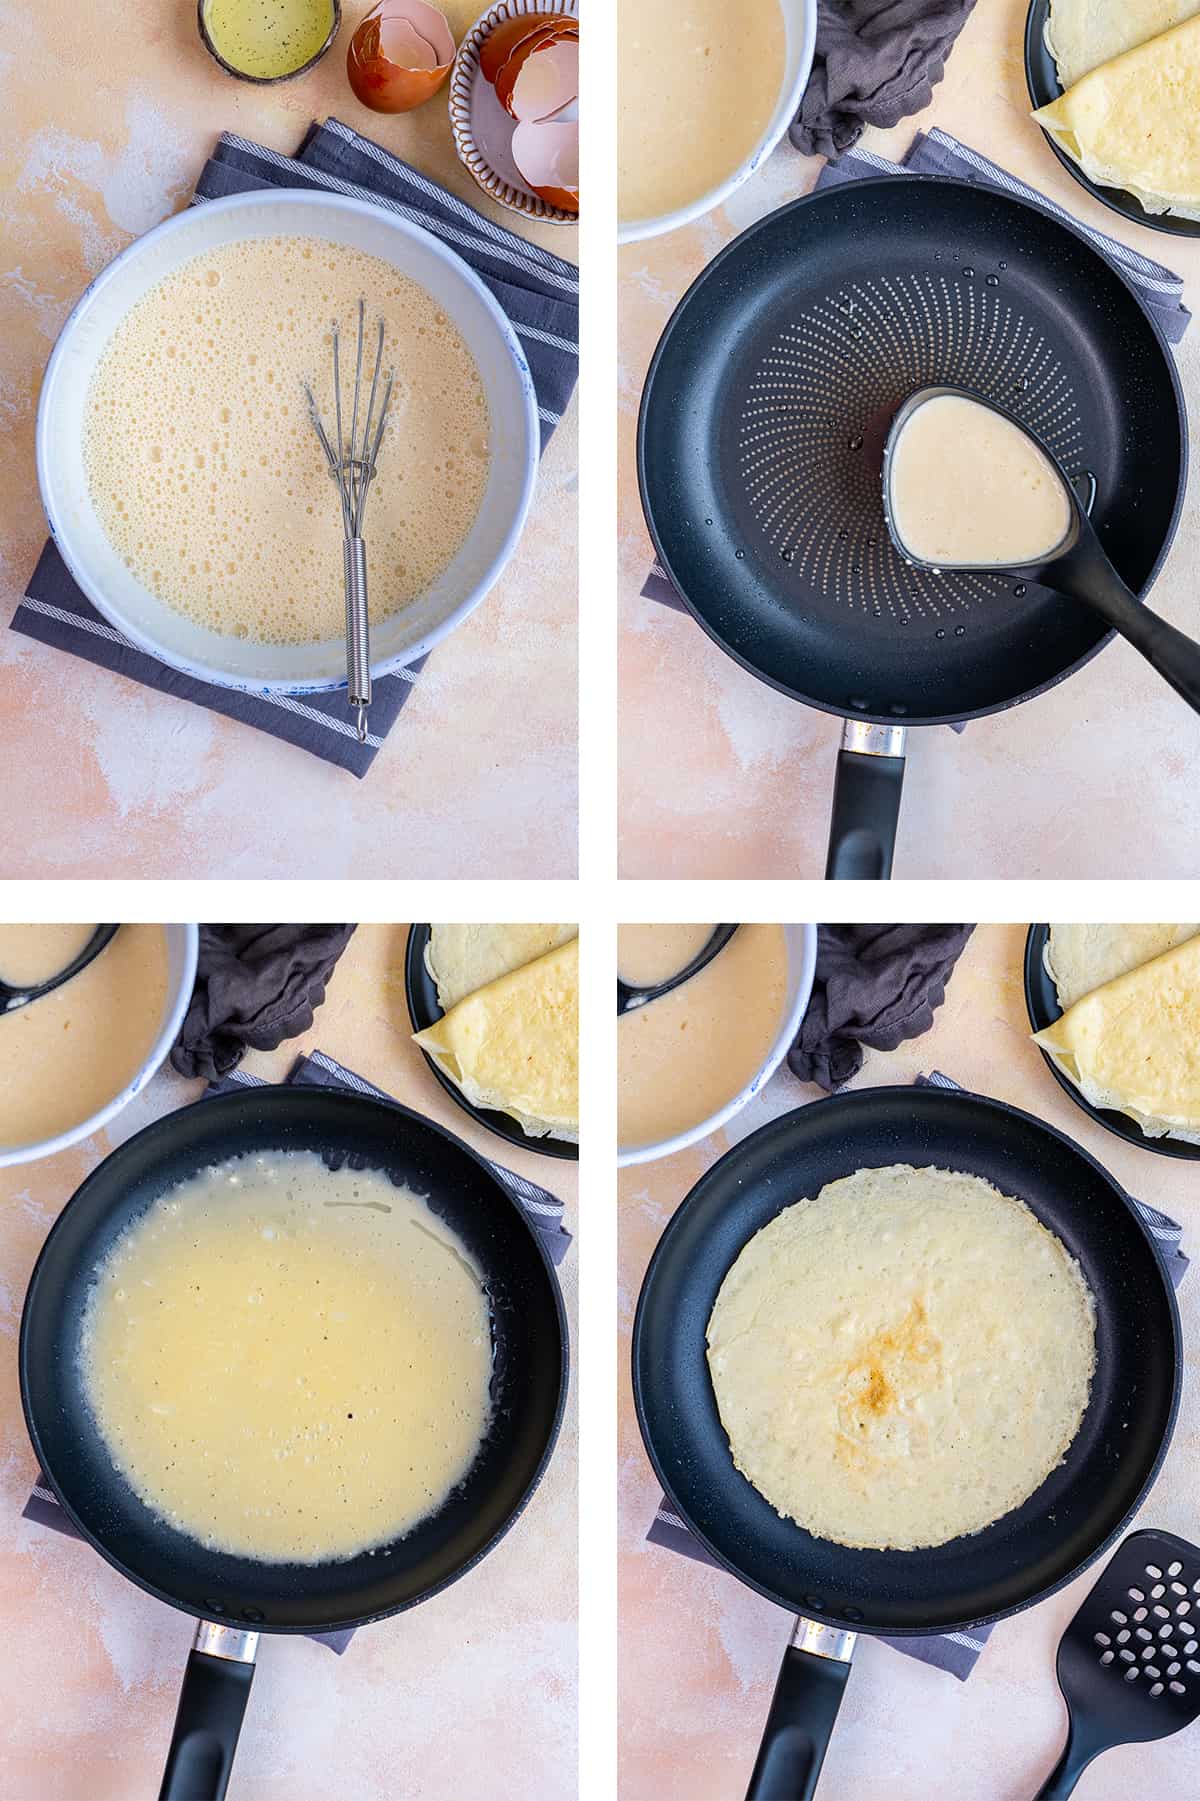 A collage of pictures showing the steps of cooking crepes in a pan.